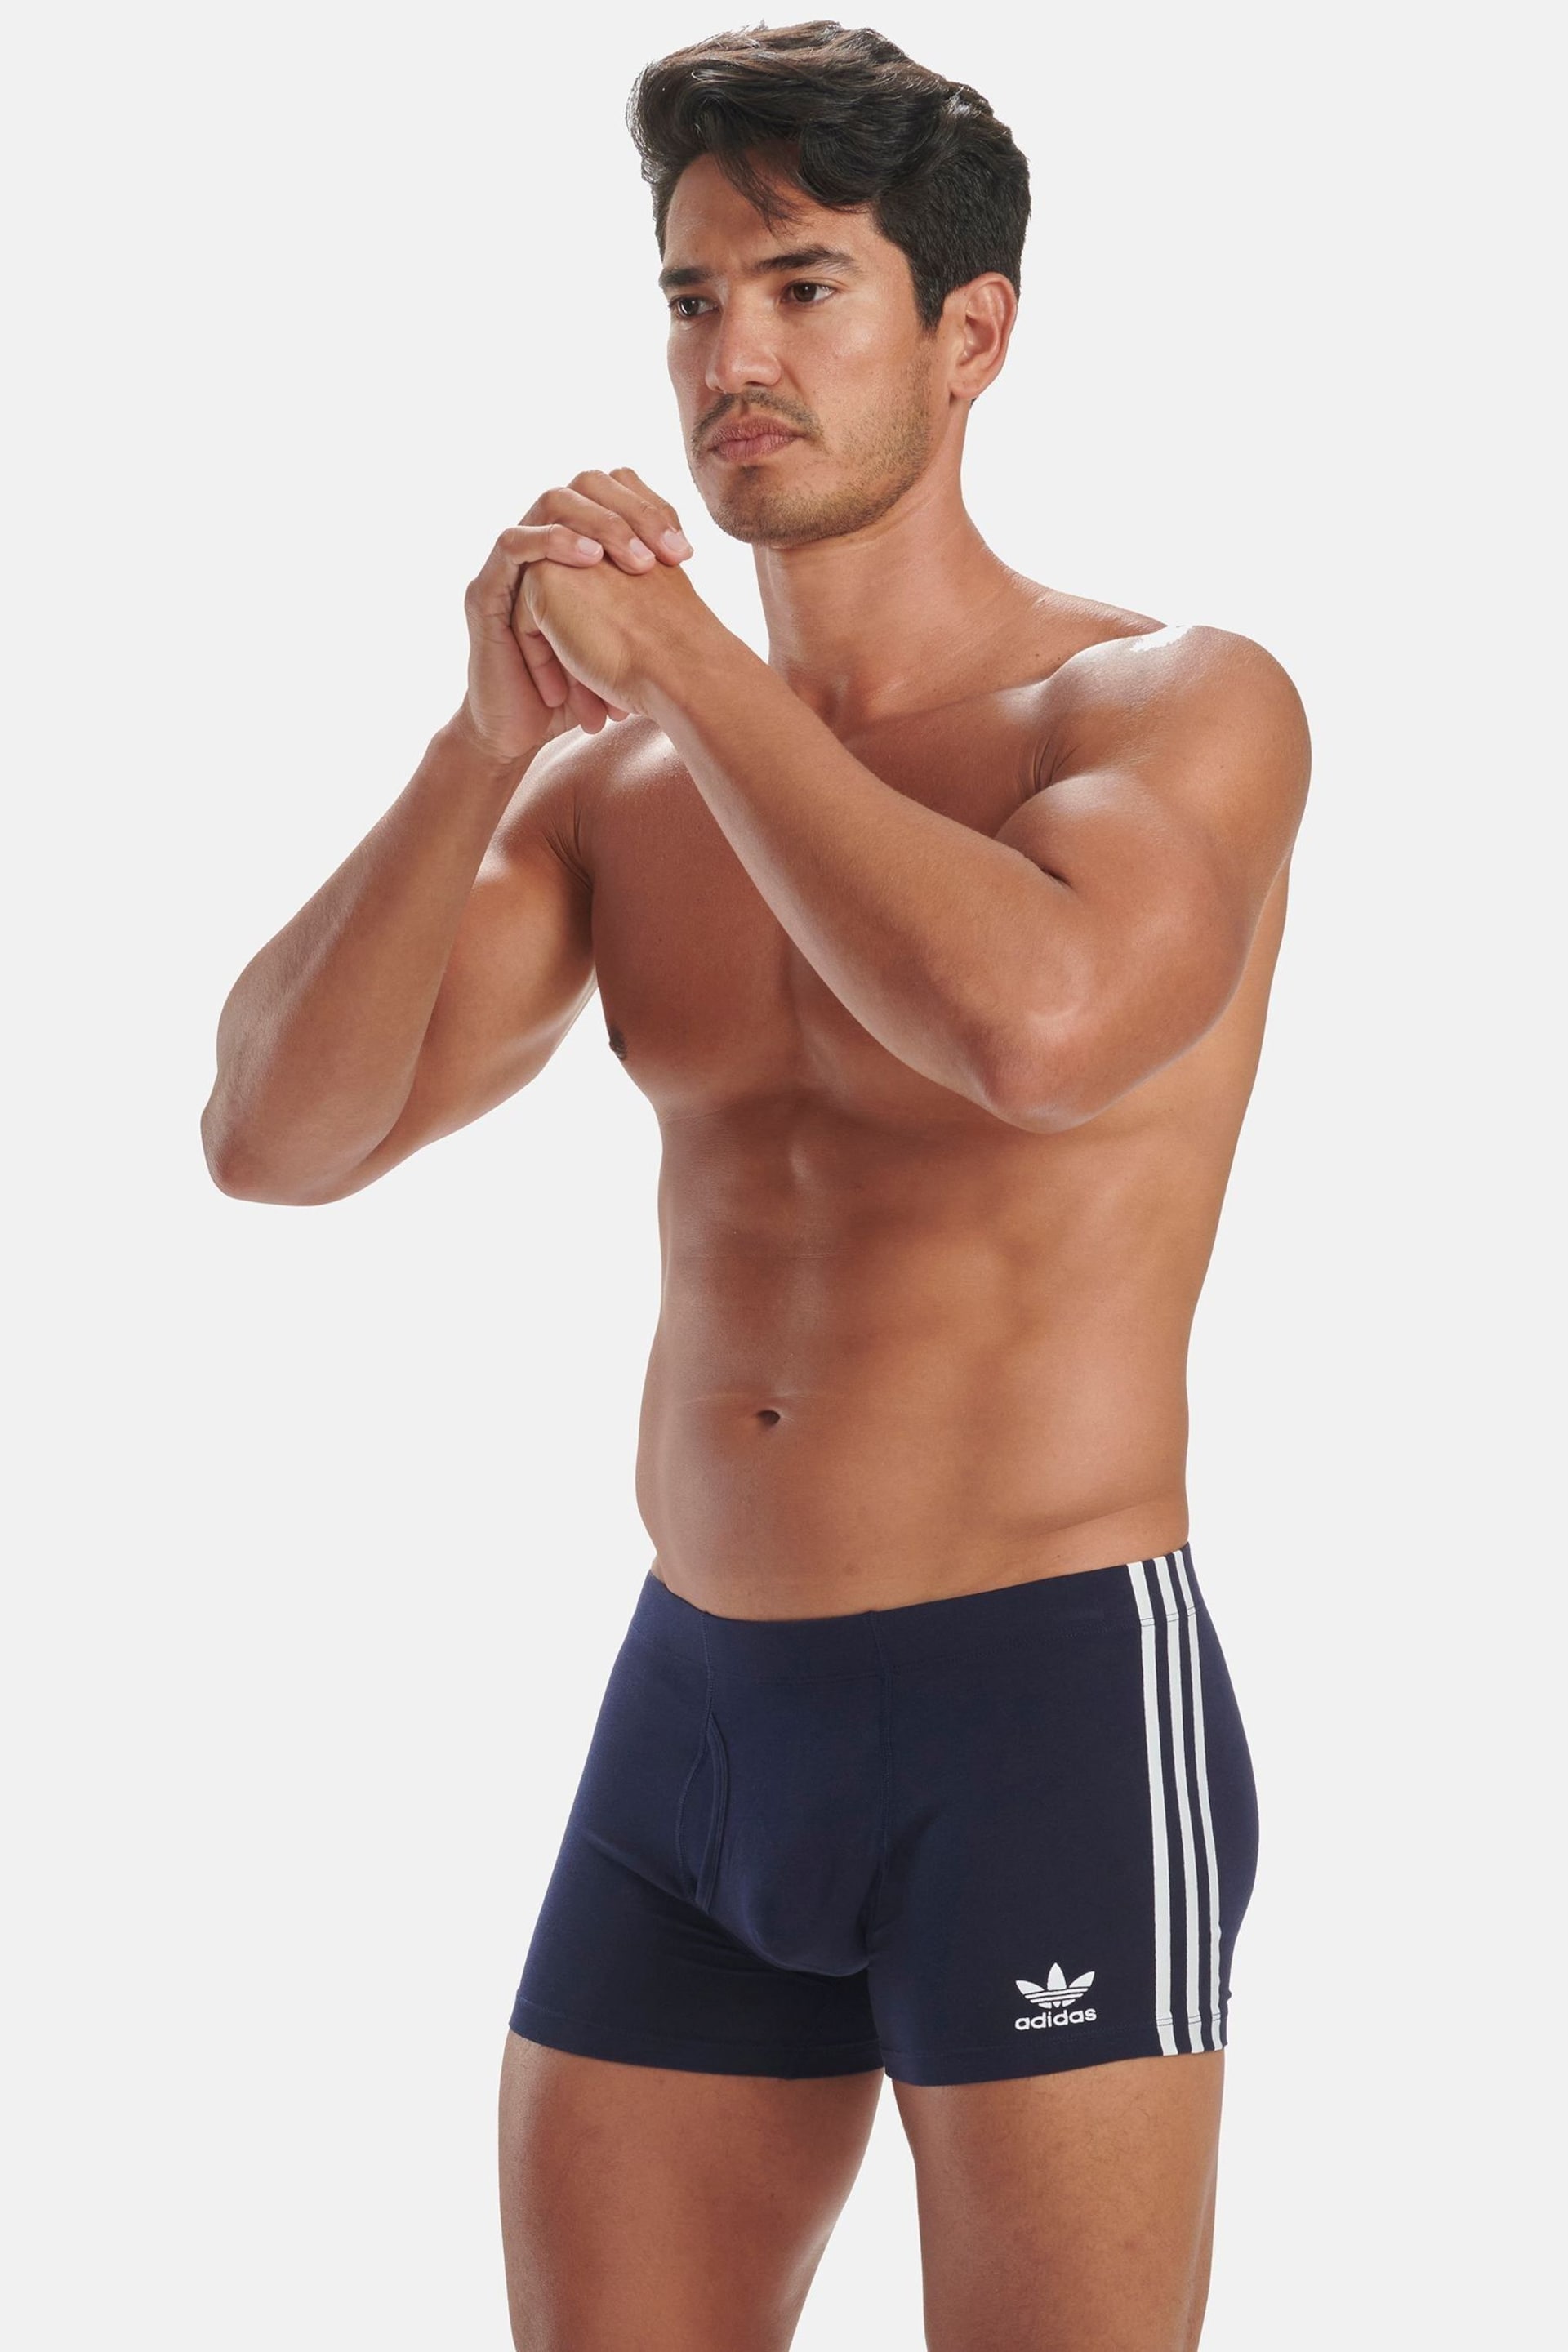 adidas Natural Cotton Flex 3 Stripe Boxers 3 Pack - Image 4 of 11